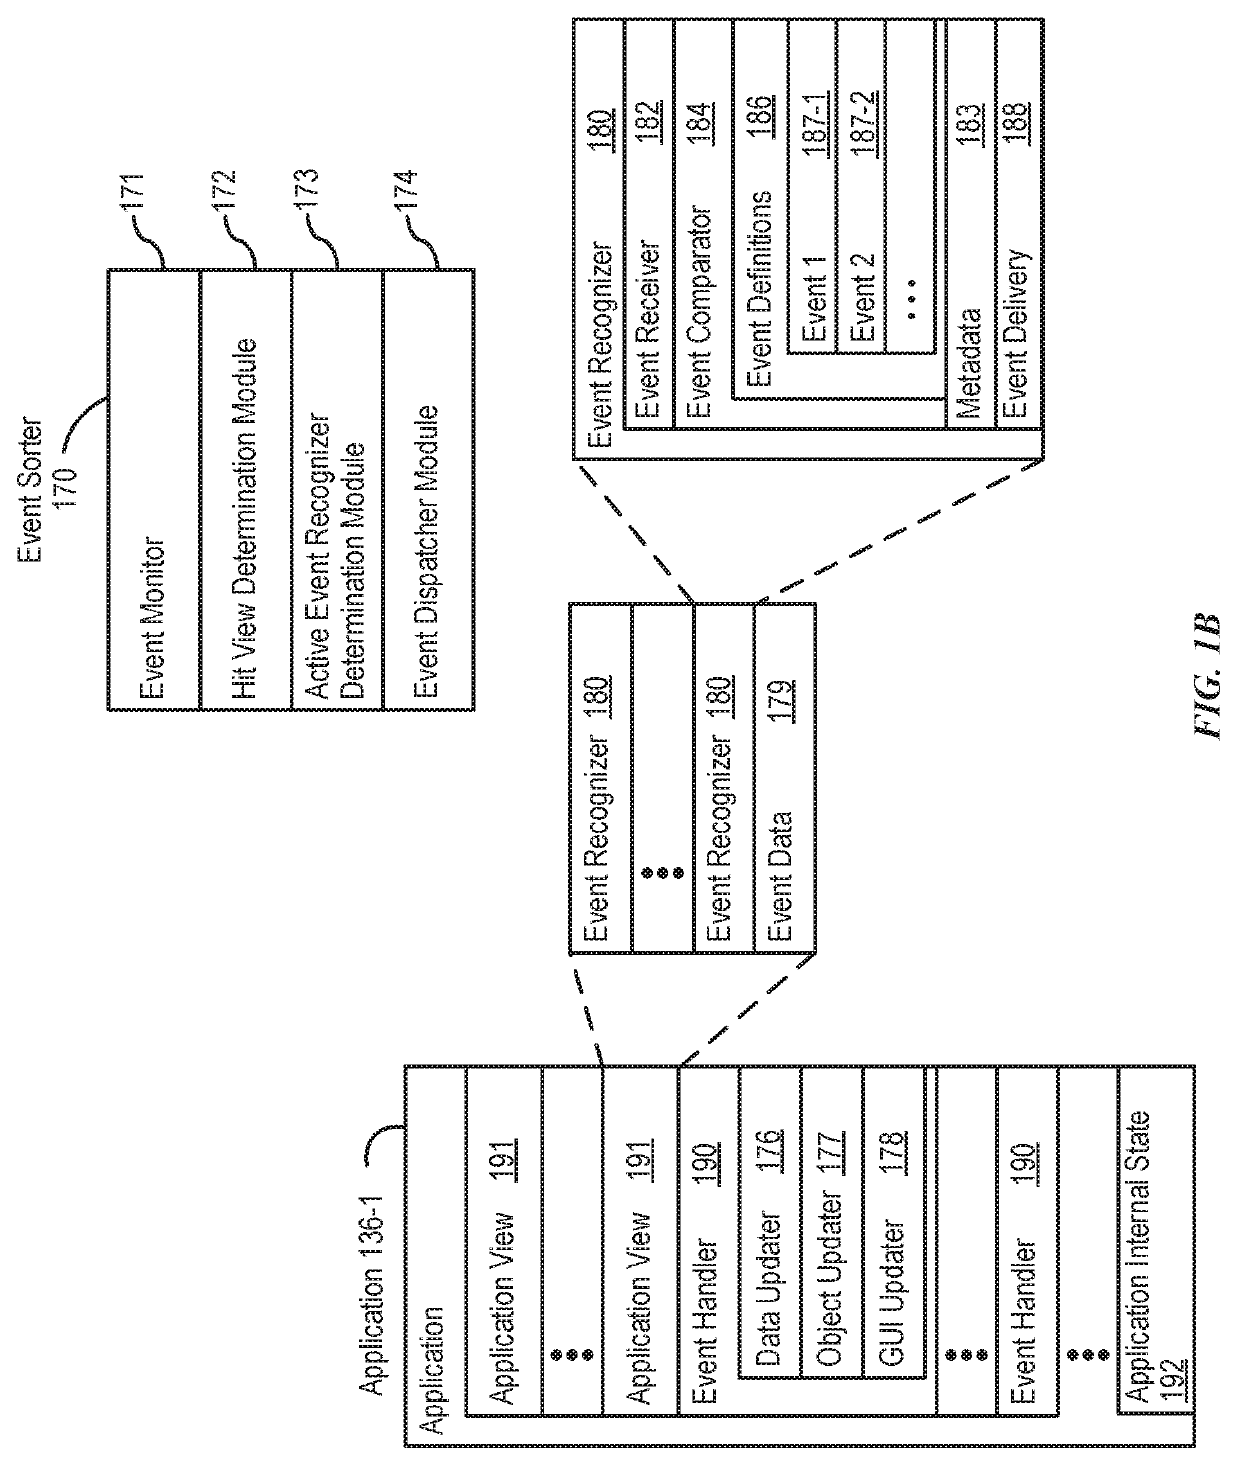 Media capture lock affordance for graphical user interface